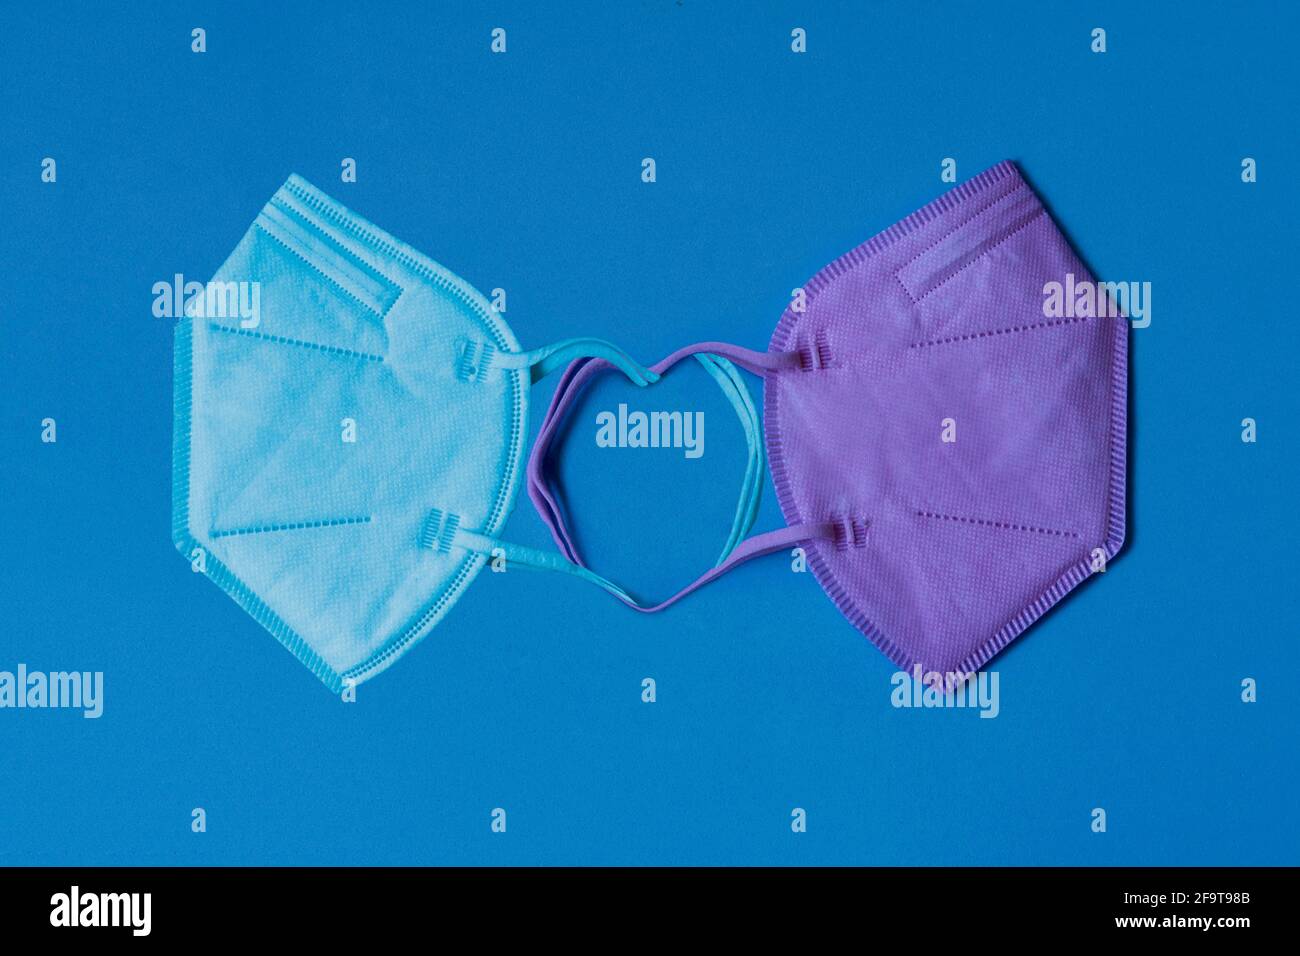 Two pink and blue FFP2 type medical masks forming a 'Stay safe' heart on a blue background Stock Photo